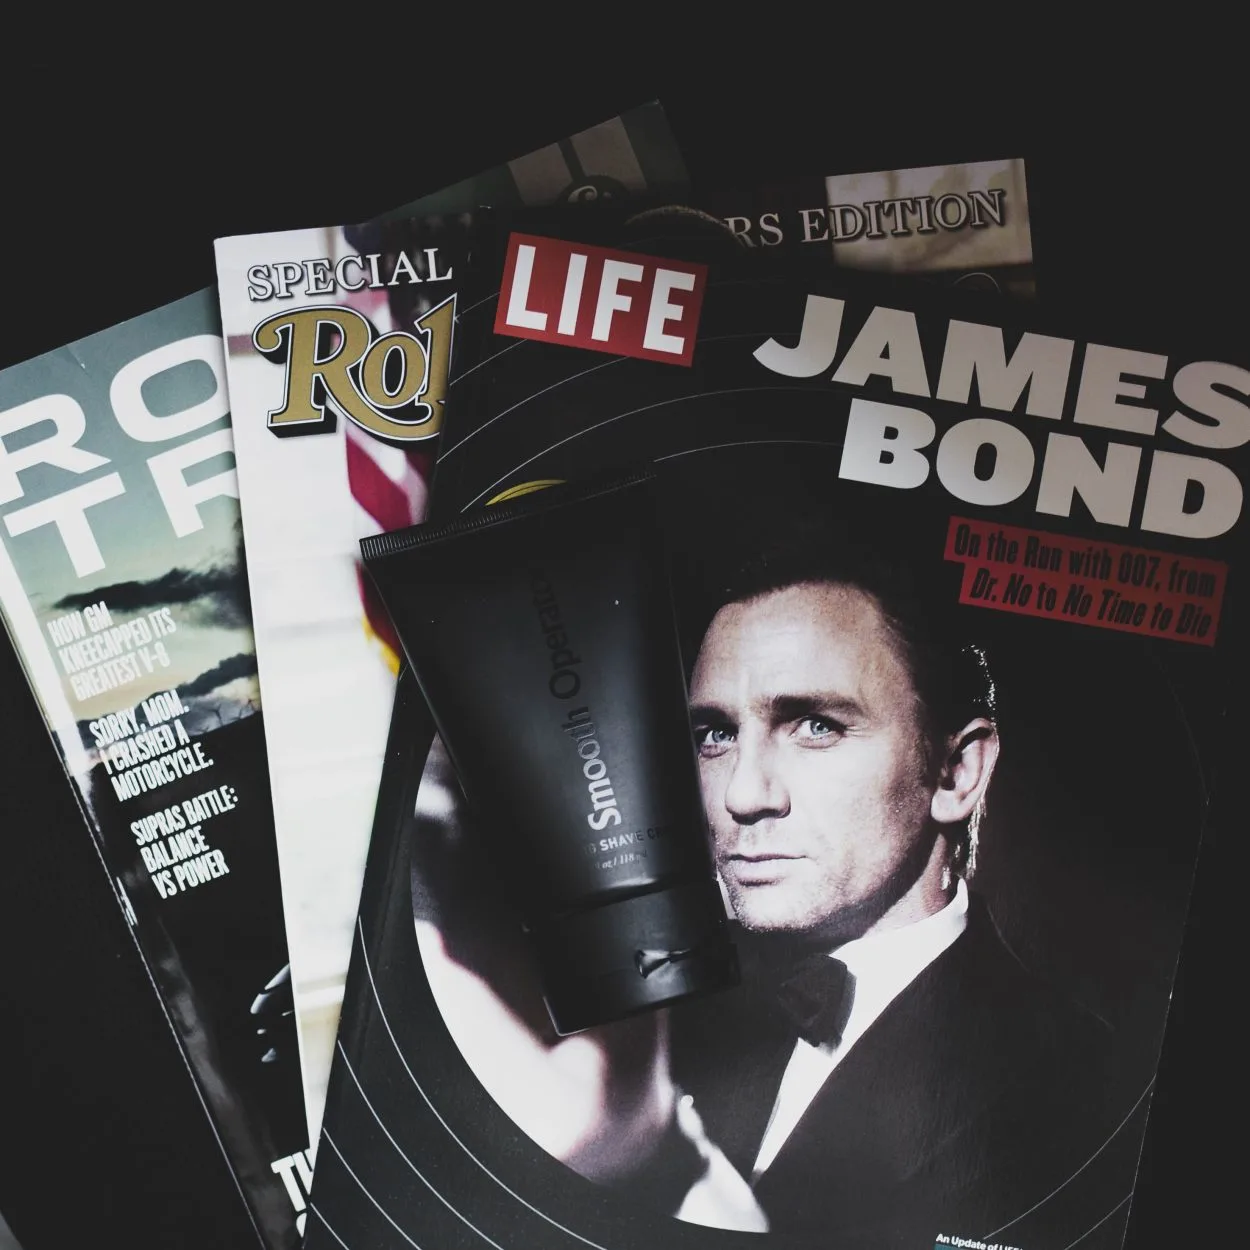 Magazine covers, one with James Bond